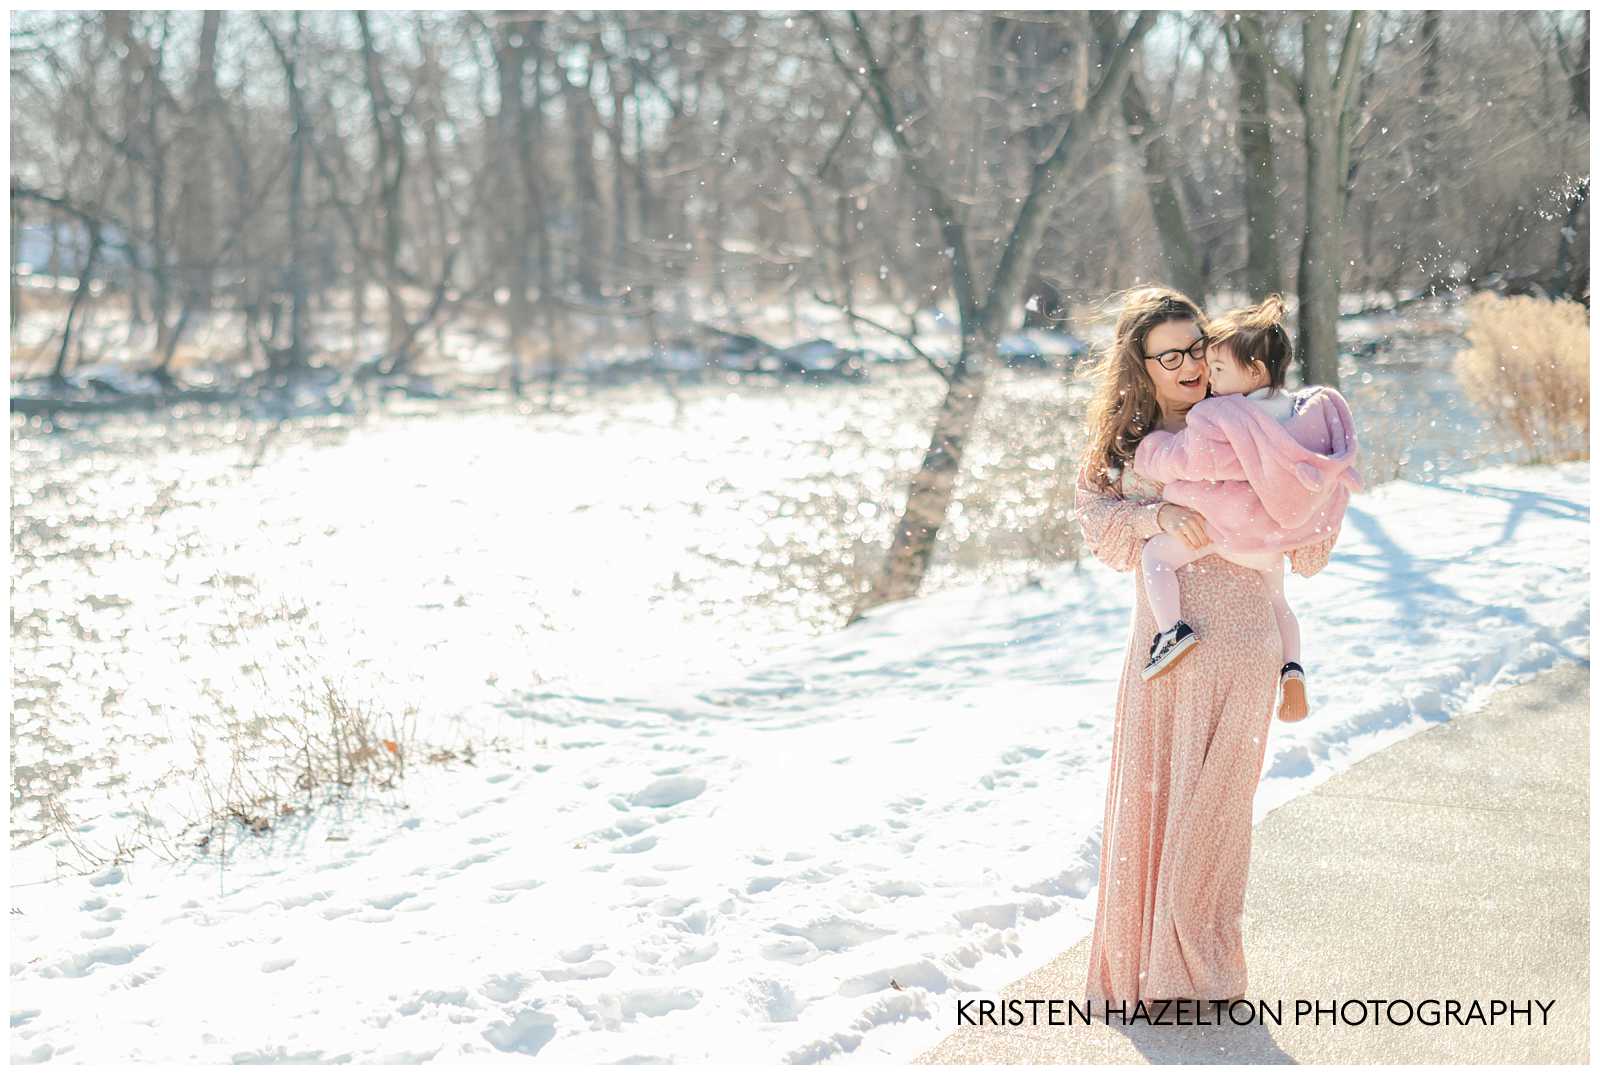 Mom wearing glasses and pink dress holding her toddler daughter on a snowy day next to a river. Winter photoshoot ideas by Kristen Hazelton